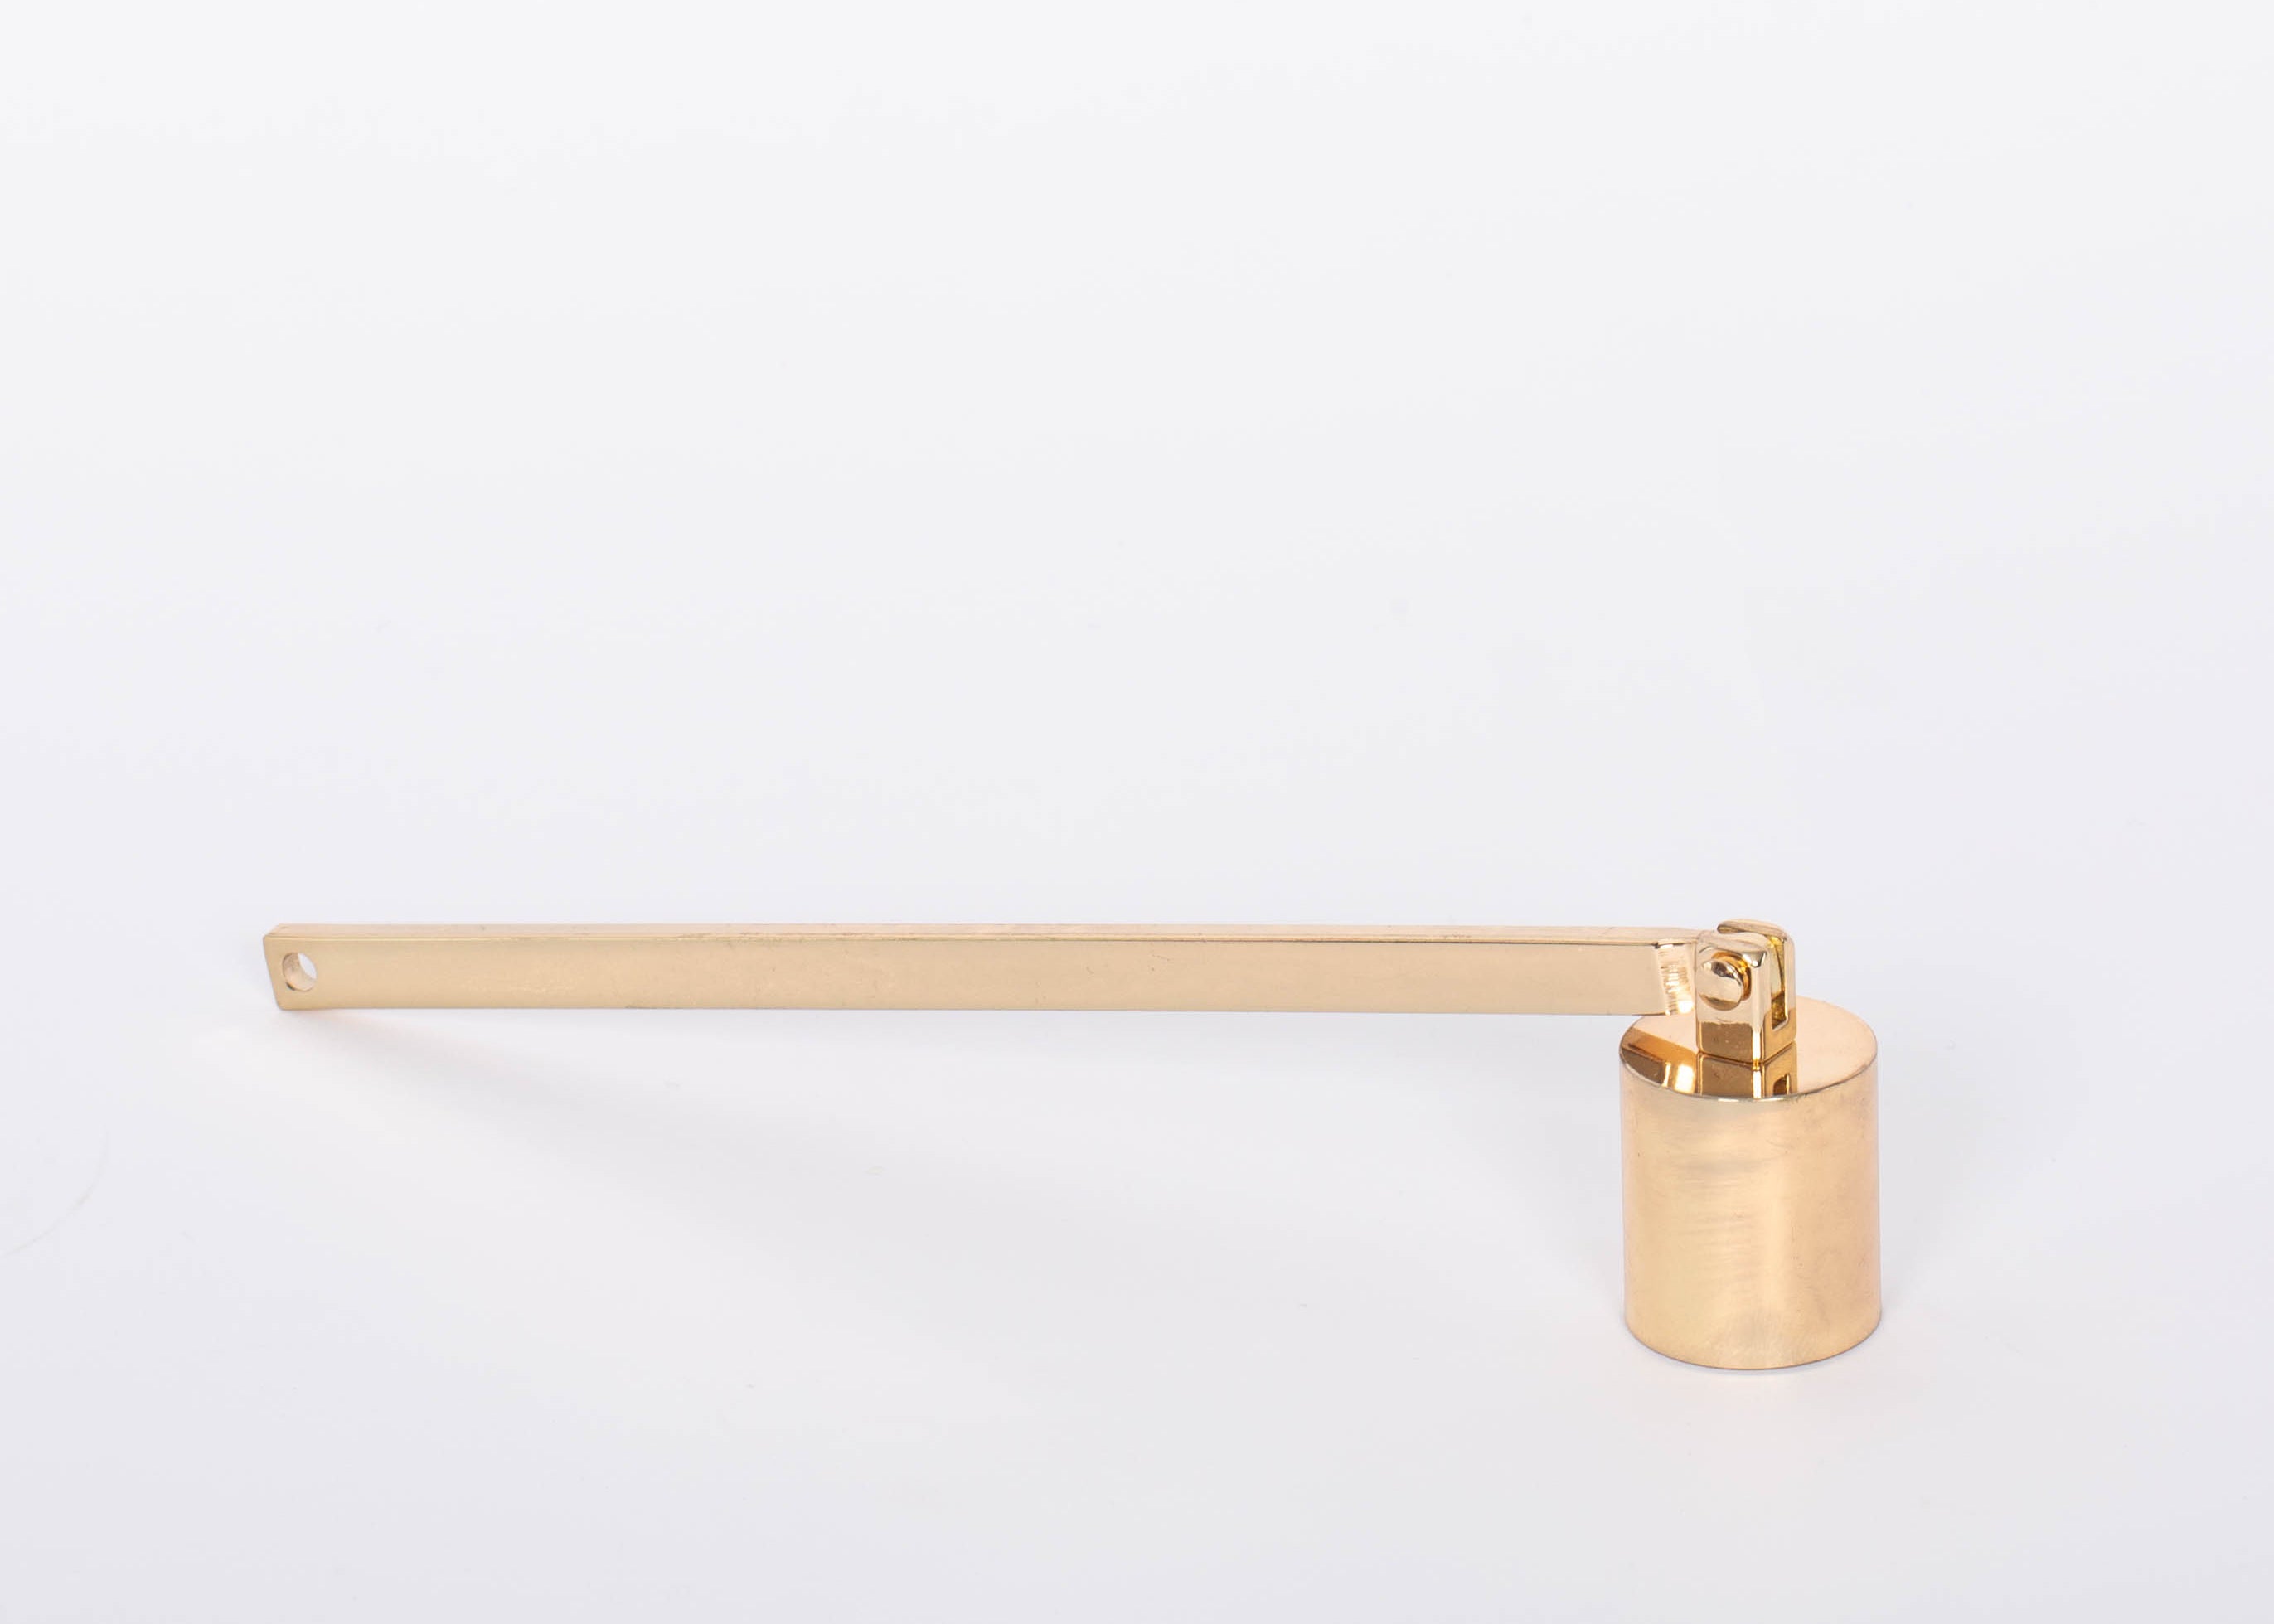 Golden Candle Snuffer by Designworks. White background.